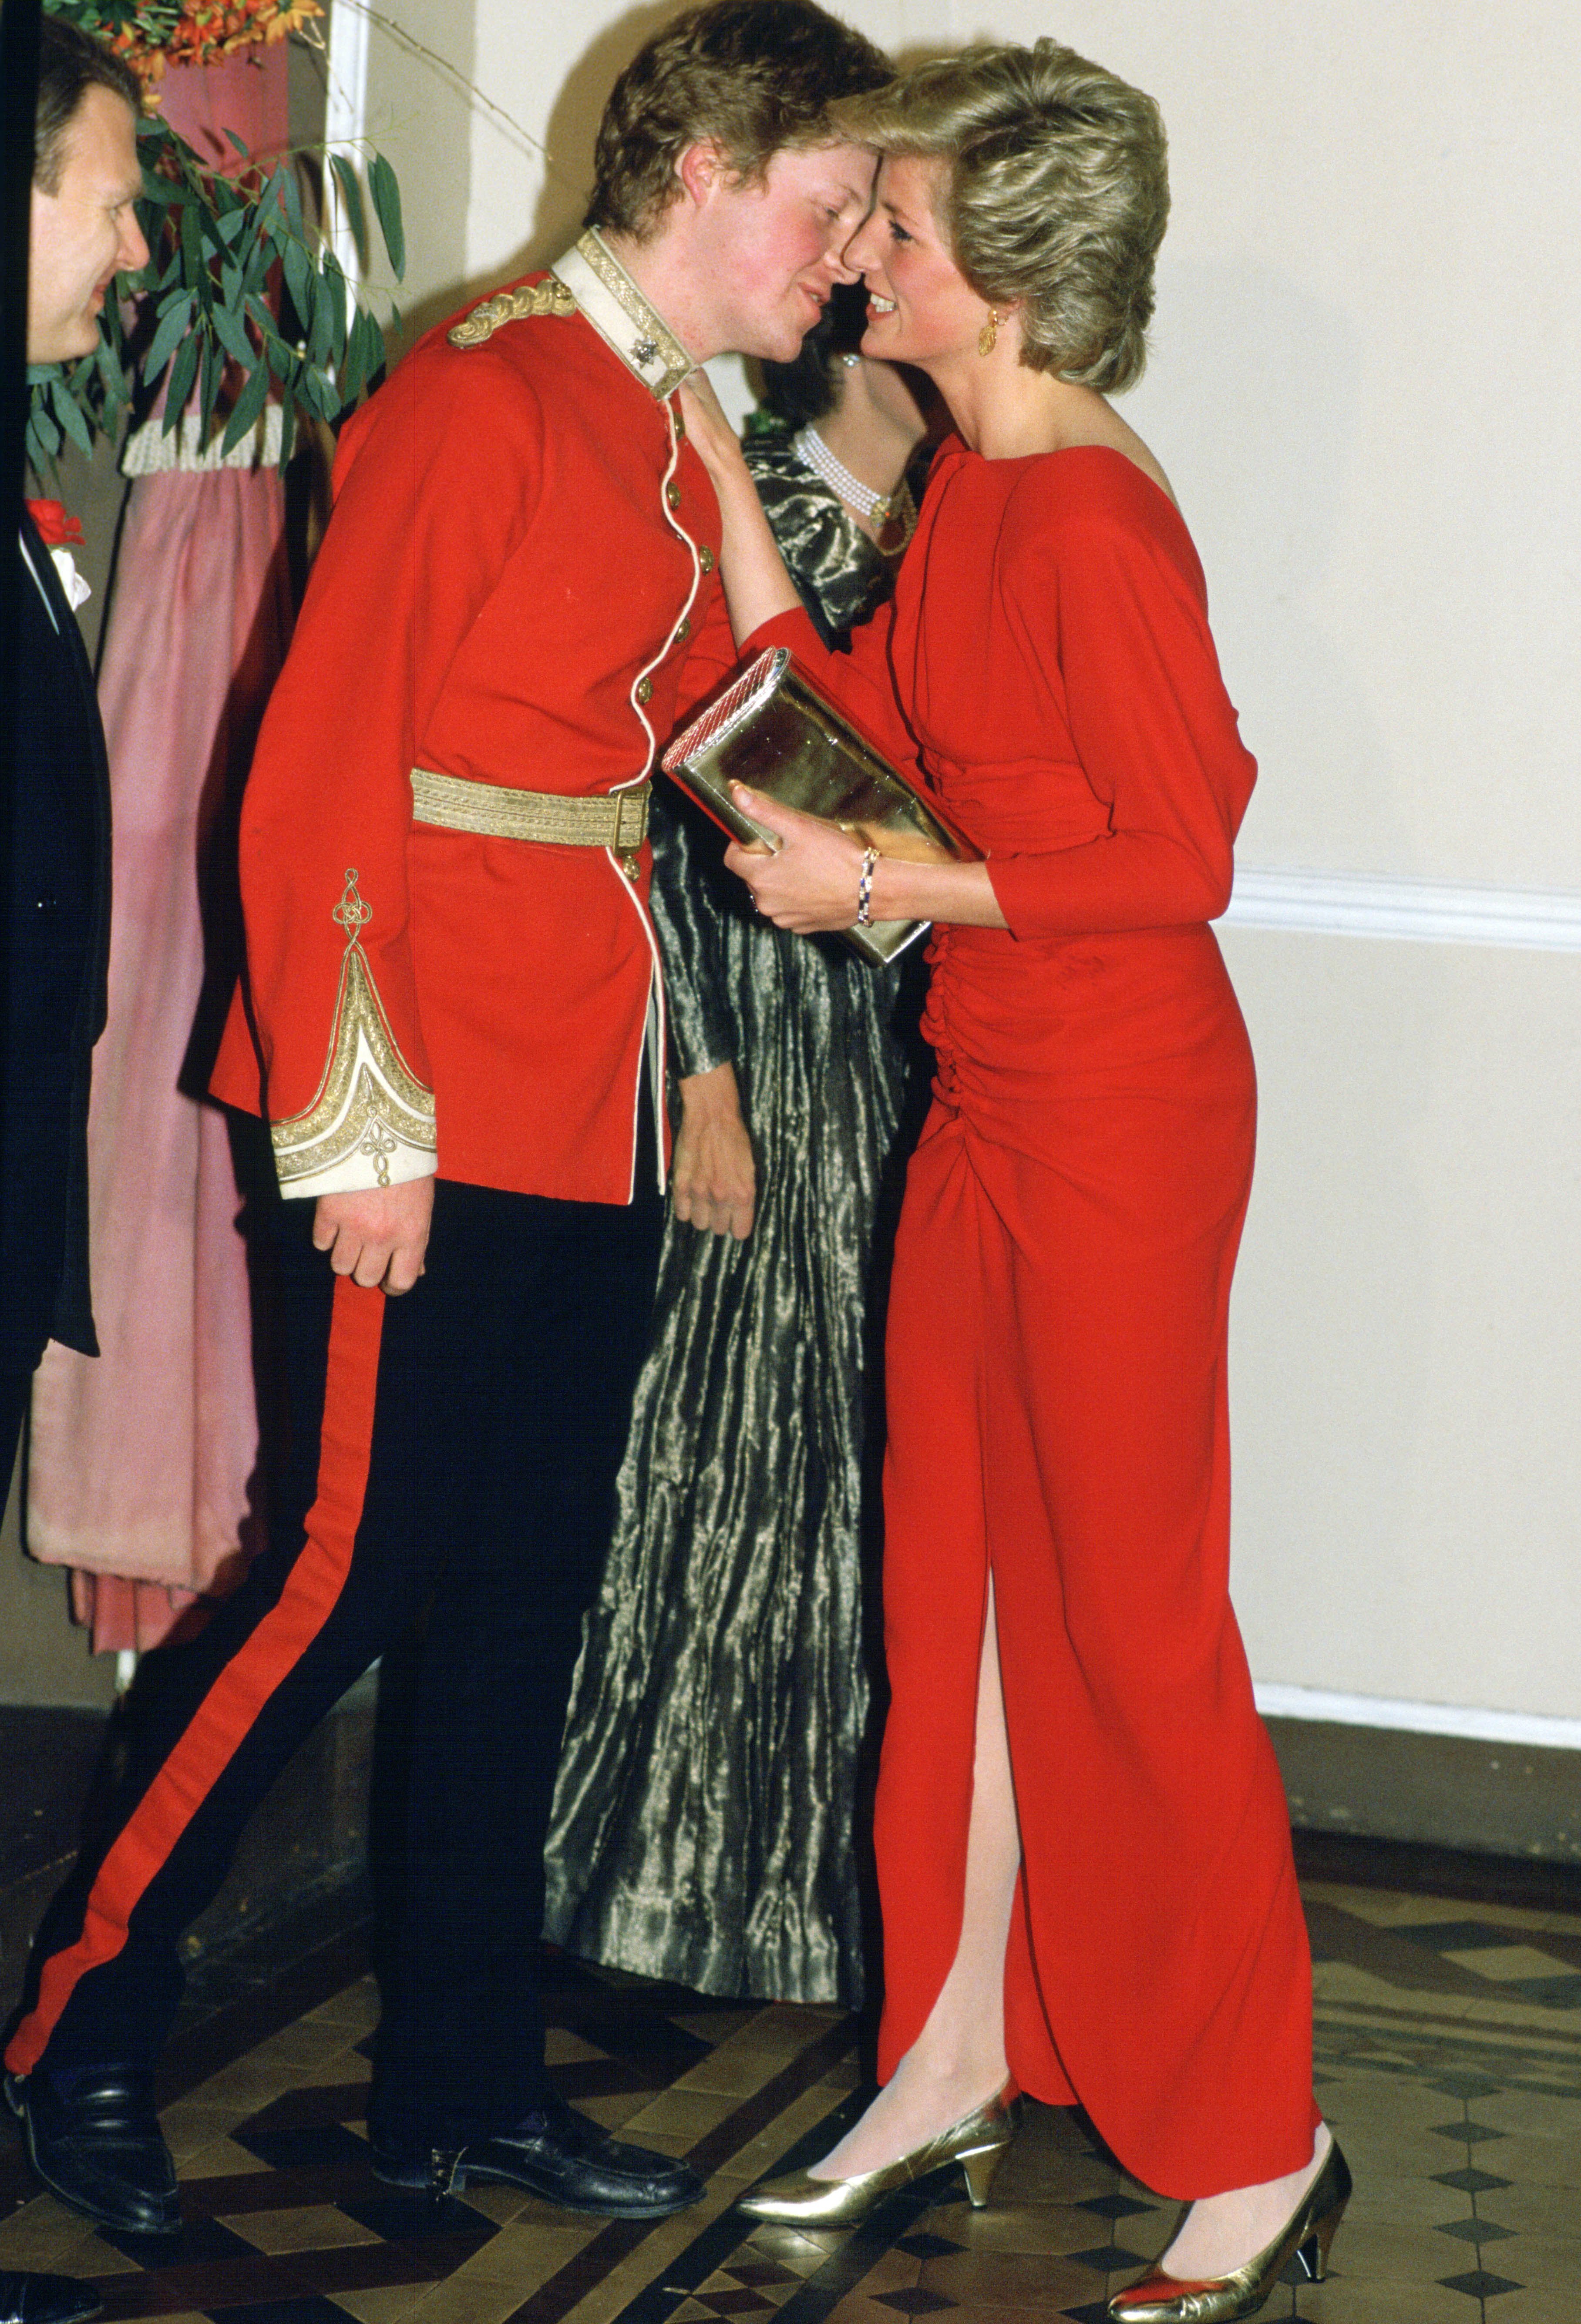 Diana, Princess of Wales photographed kissing her brother, Earl Charles Spencer at the Birthright Ball. / Source: Getty Images